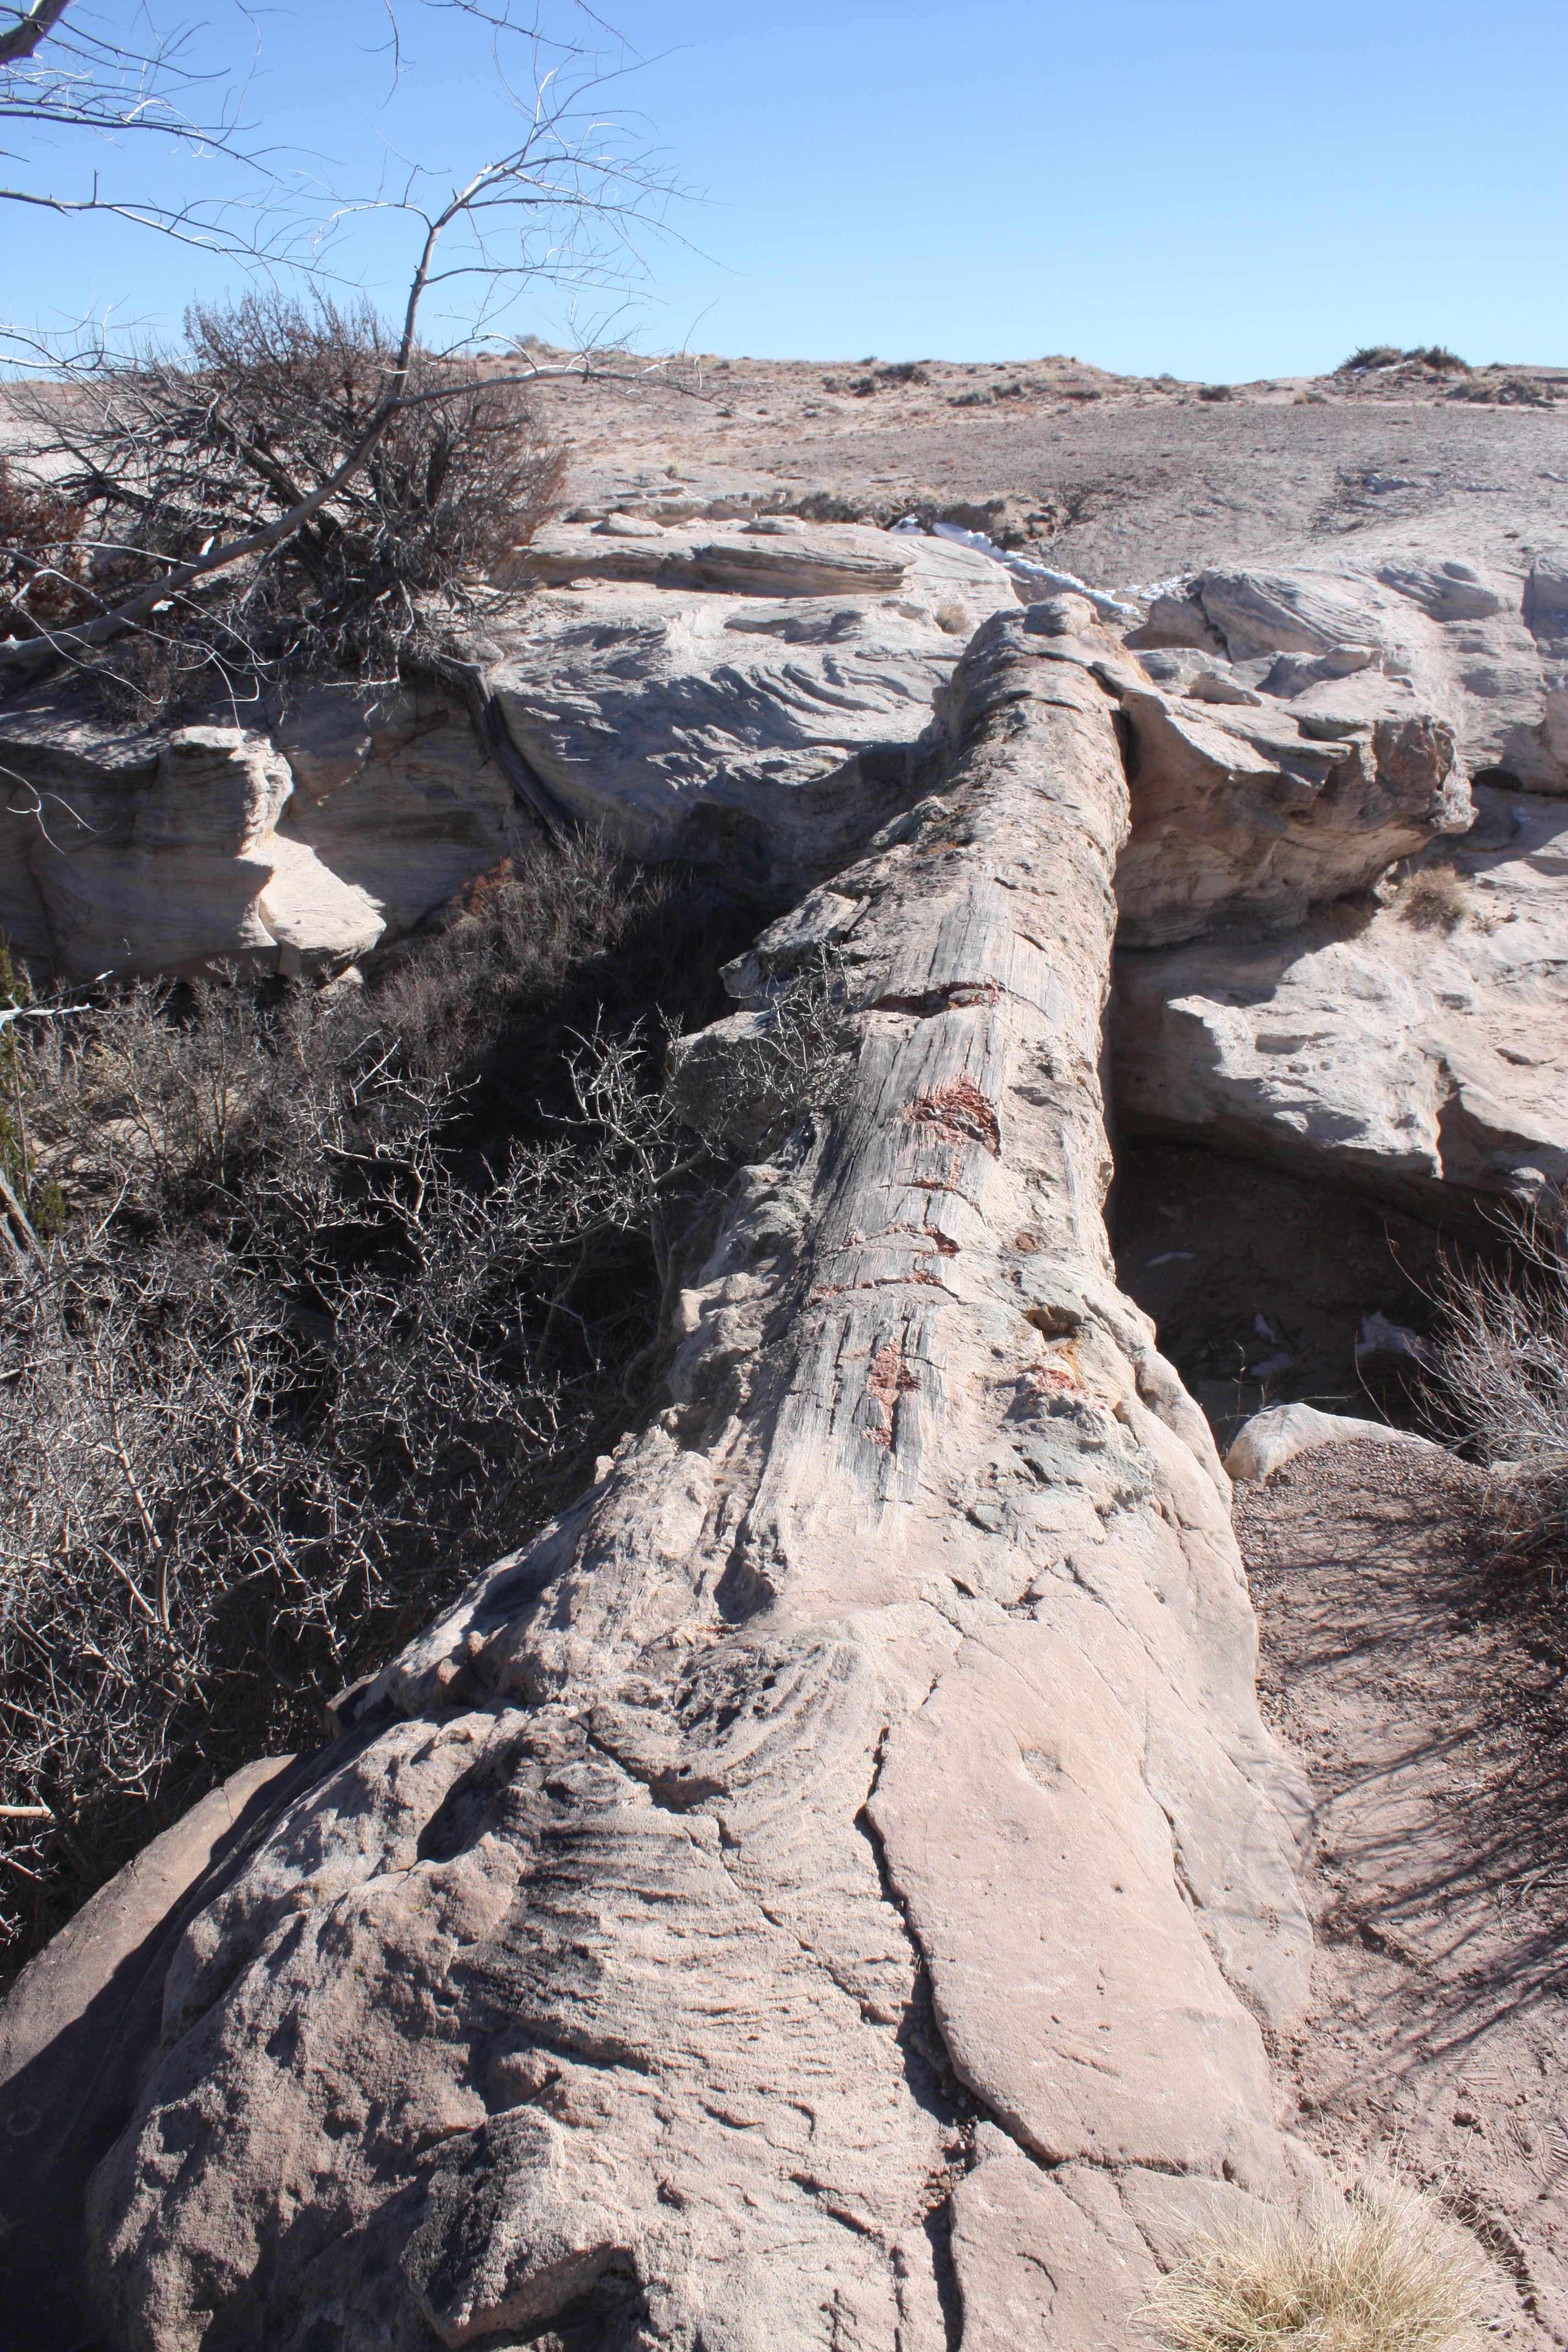 A large petrified log stretches across a gully